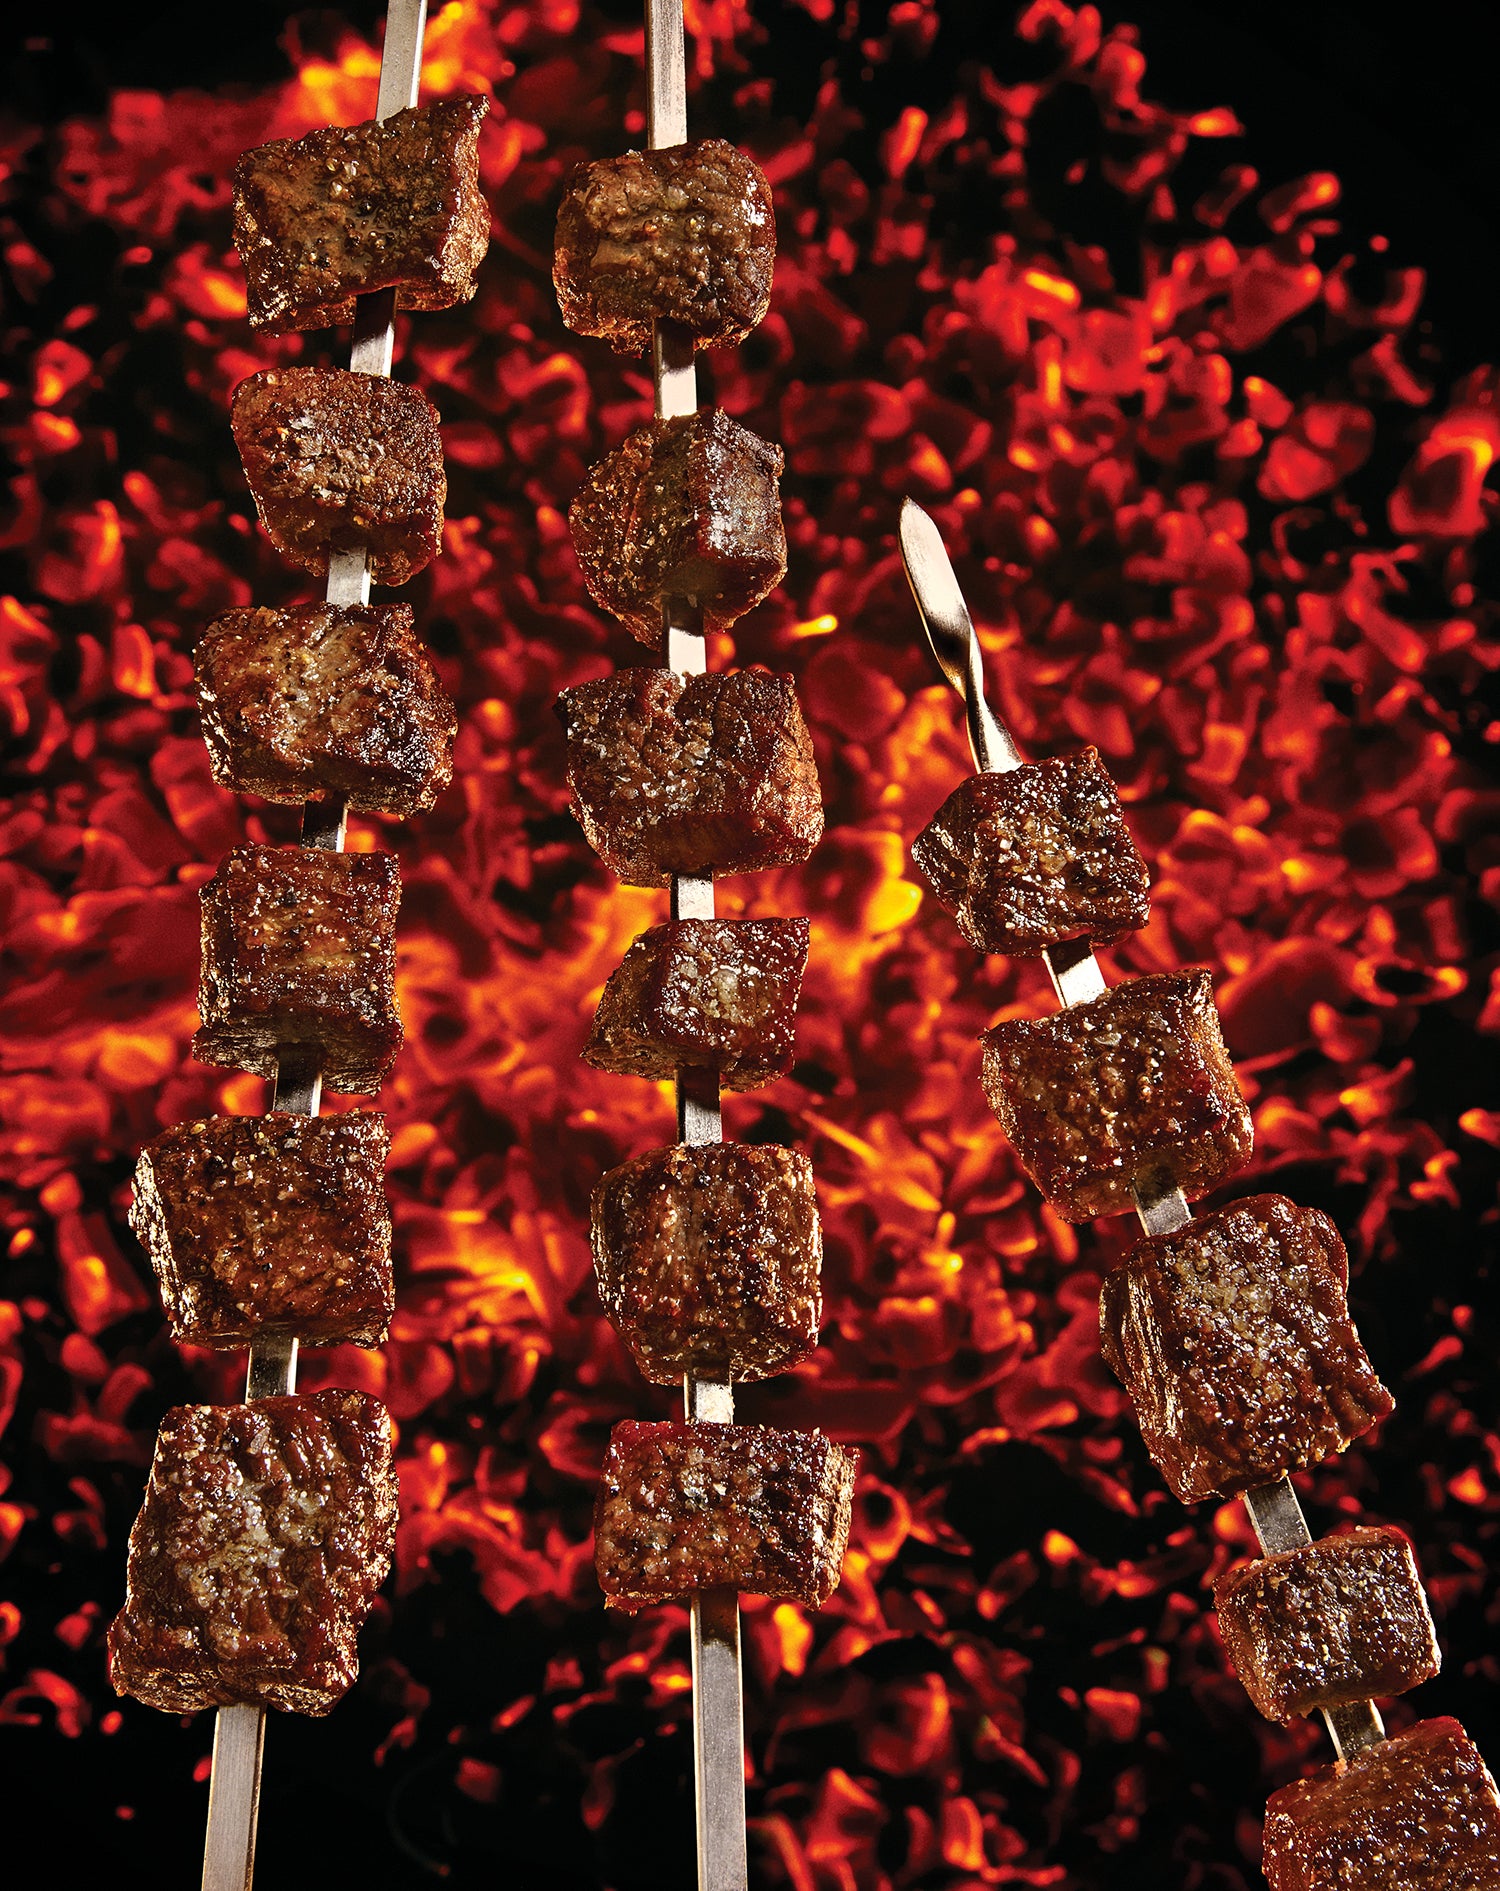 cubes of meat on skewers cook over hot coals